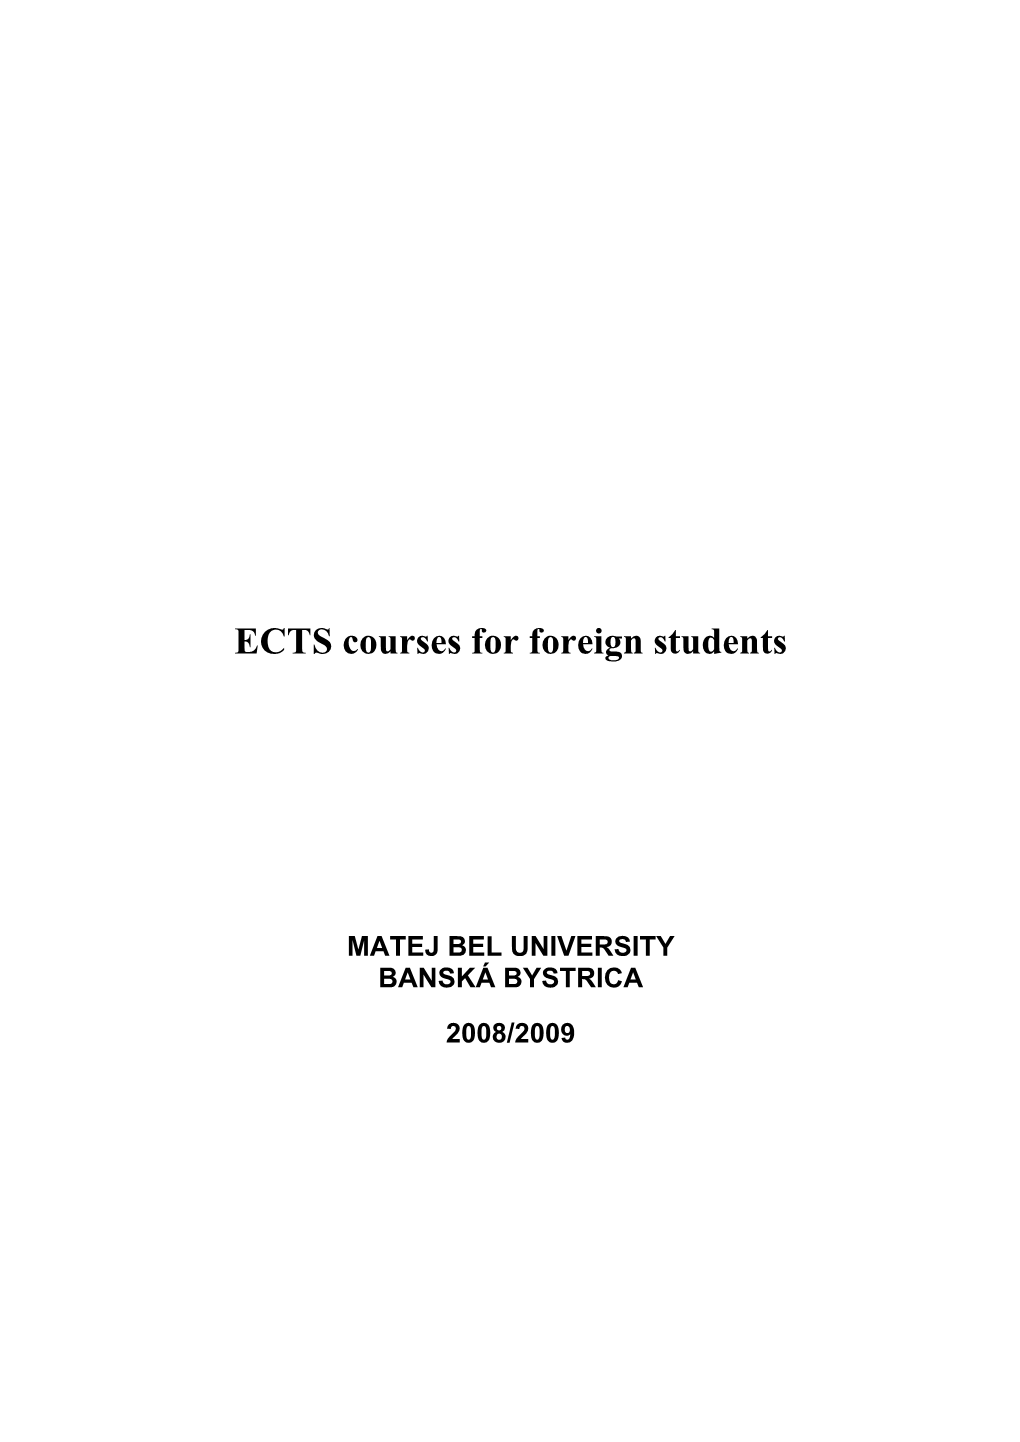 ECTS Courses for Foreign Students